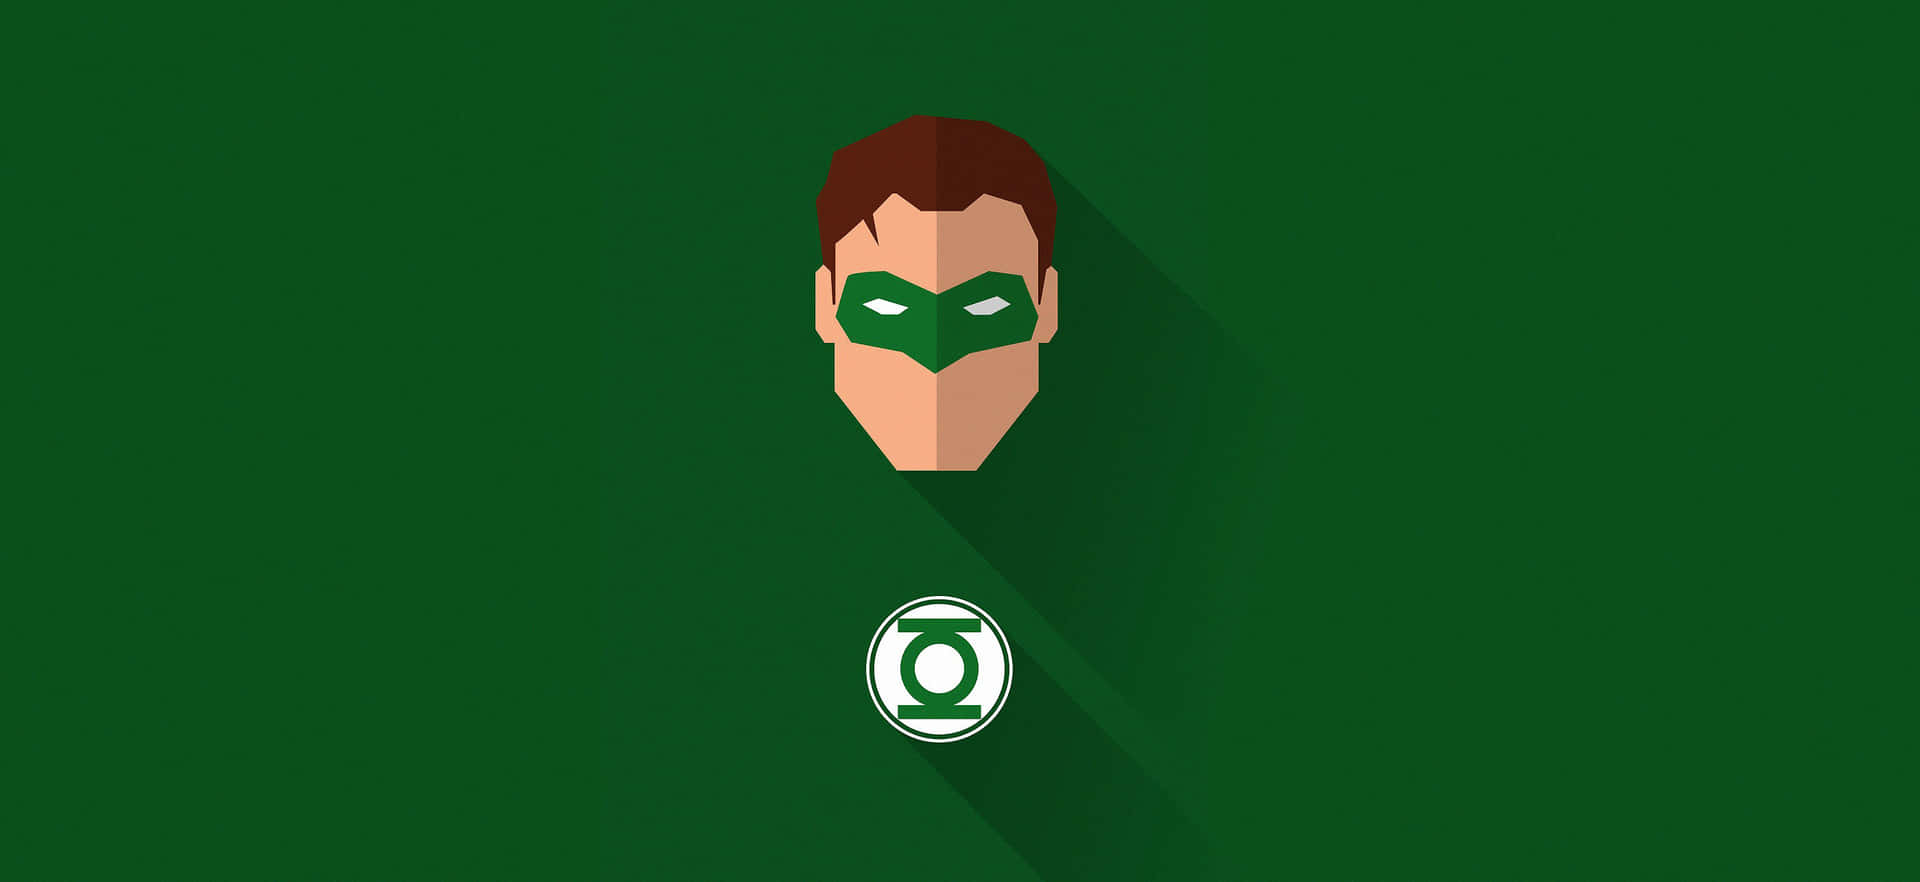 Join the Green Lantern Corps and Protect the Galaxy!